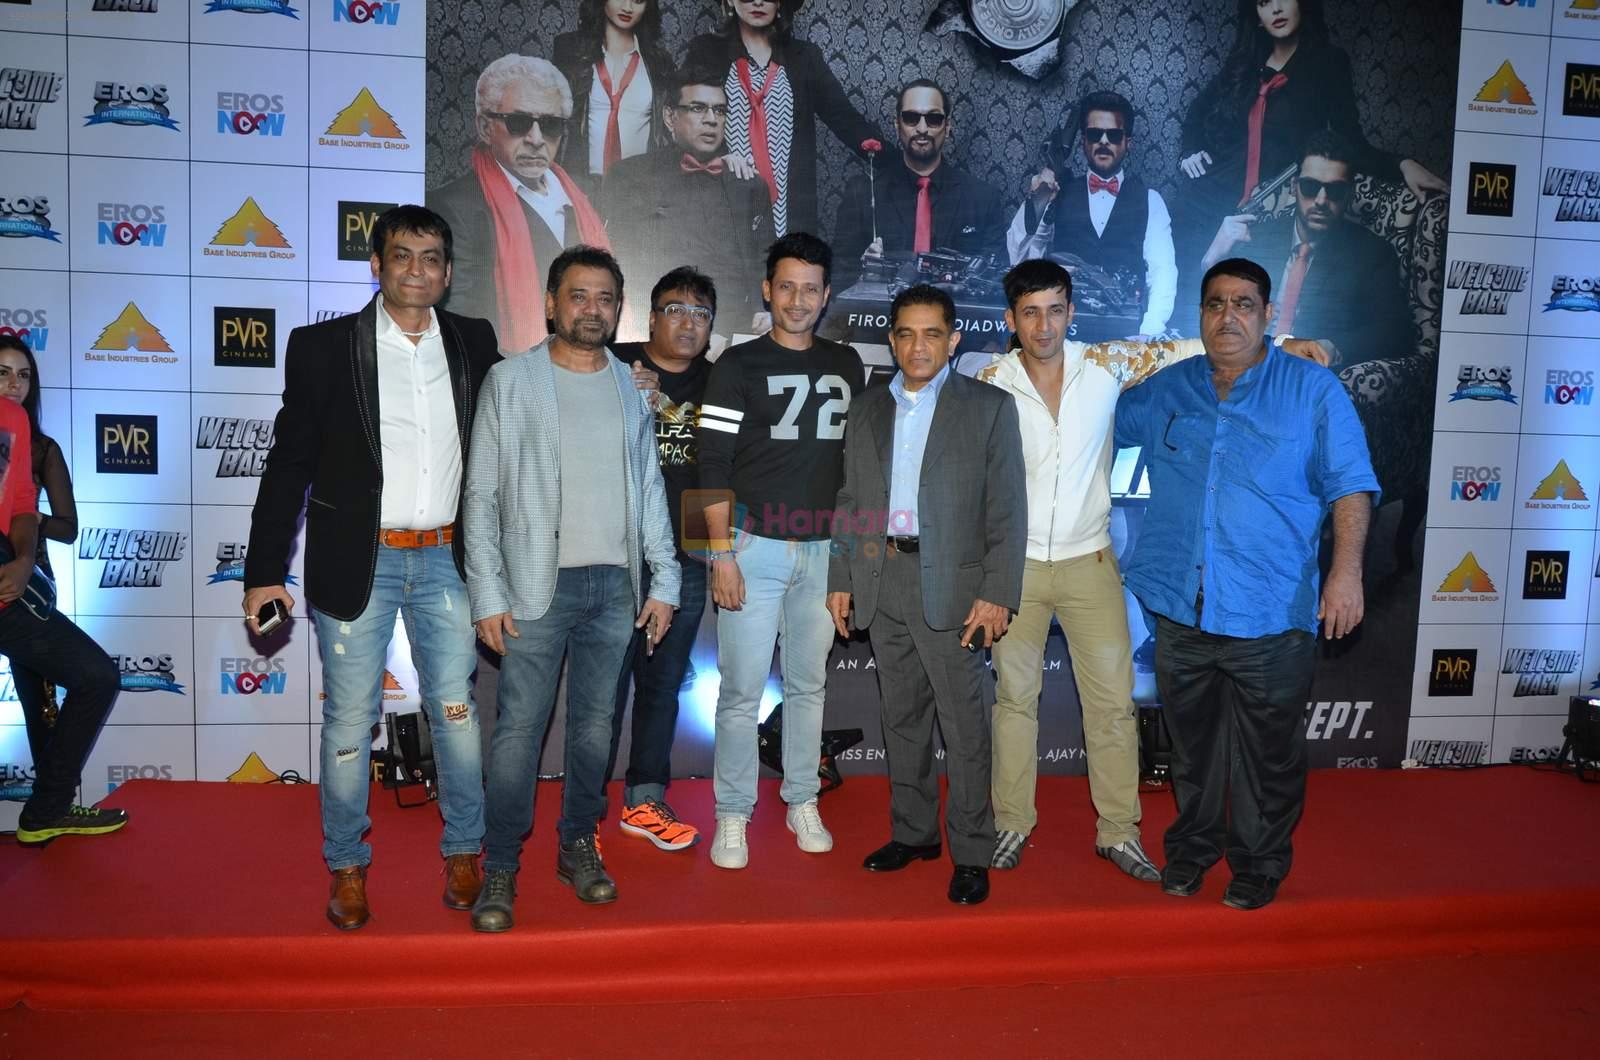 Anees Bazmee at welcome back premiere in Mumbai on 3rd  Sept 2015